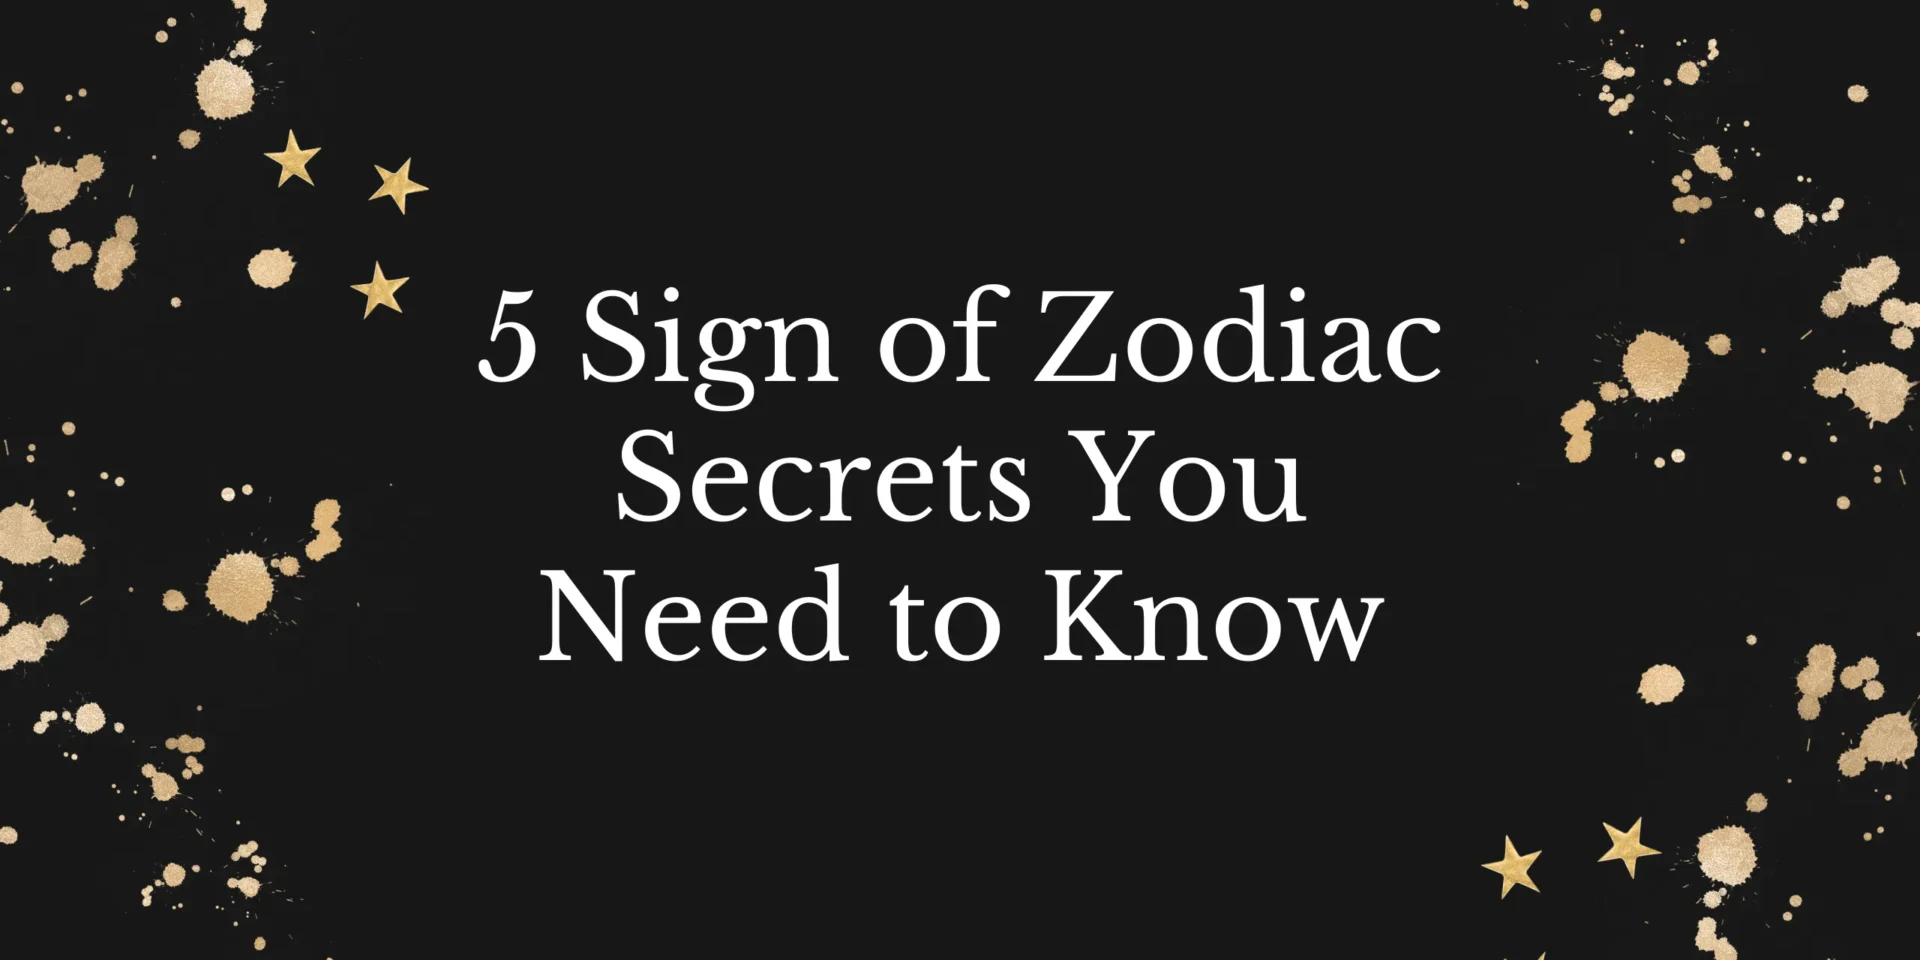 5 Sign of Zodiac Secrets You Need to Know